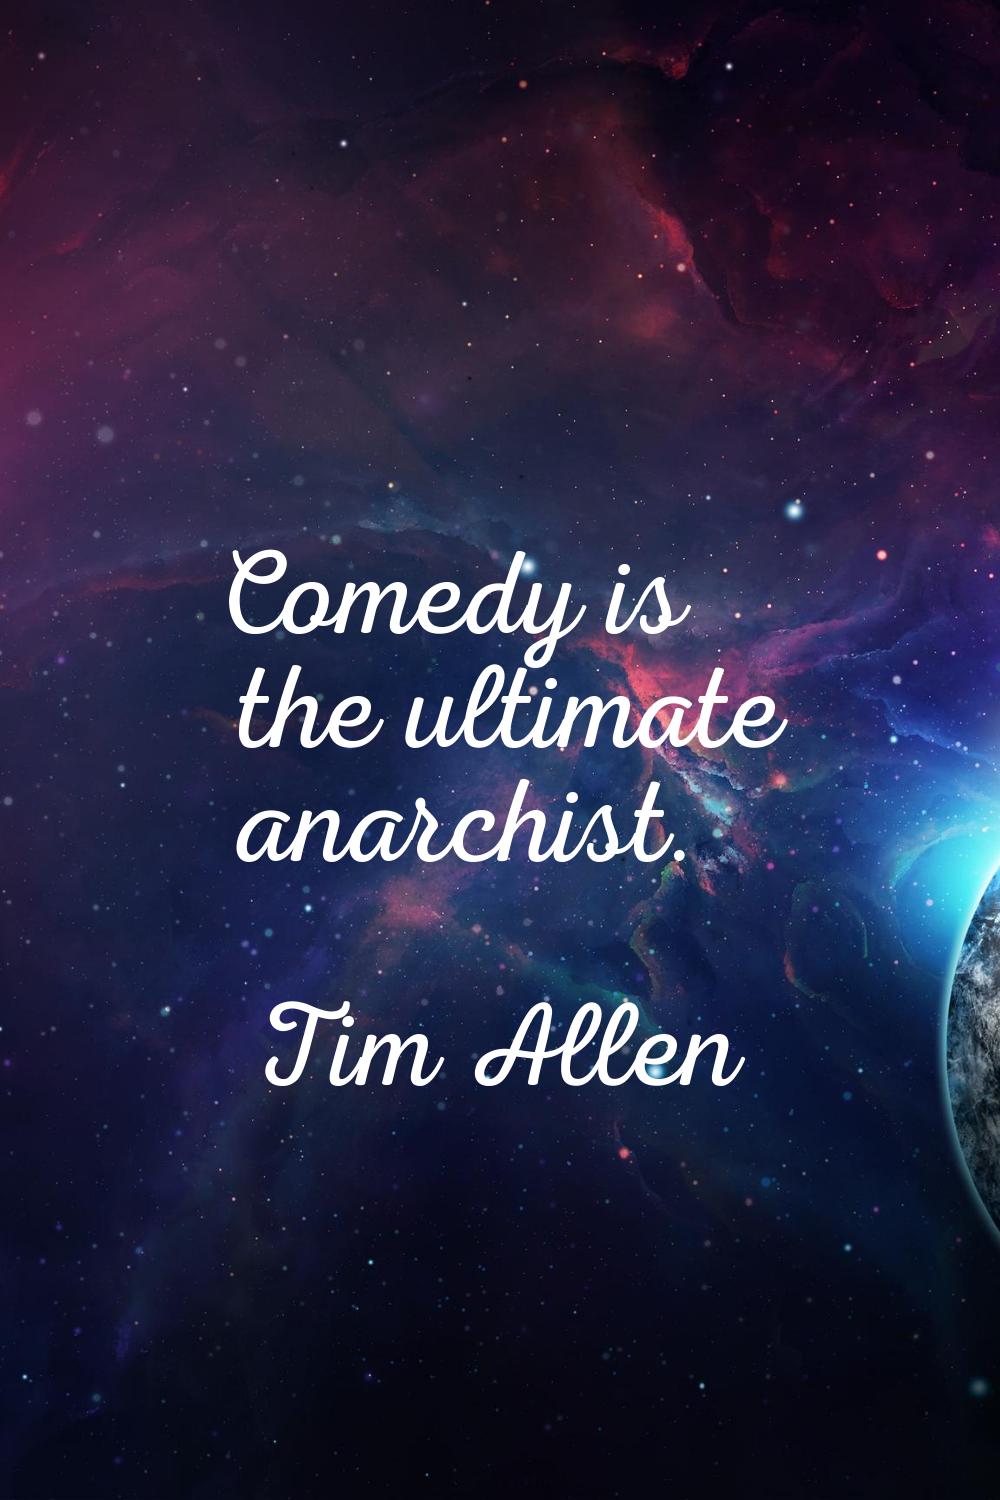 Comedy is the ultimate anarchist.